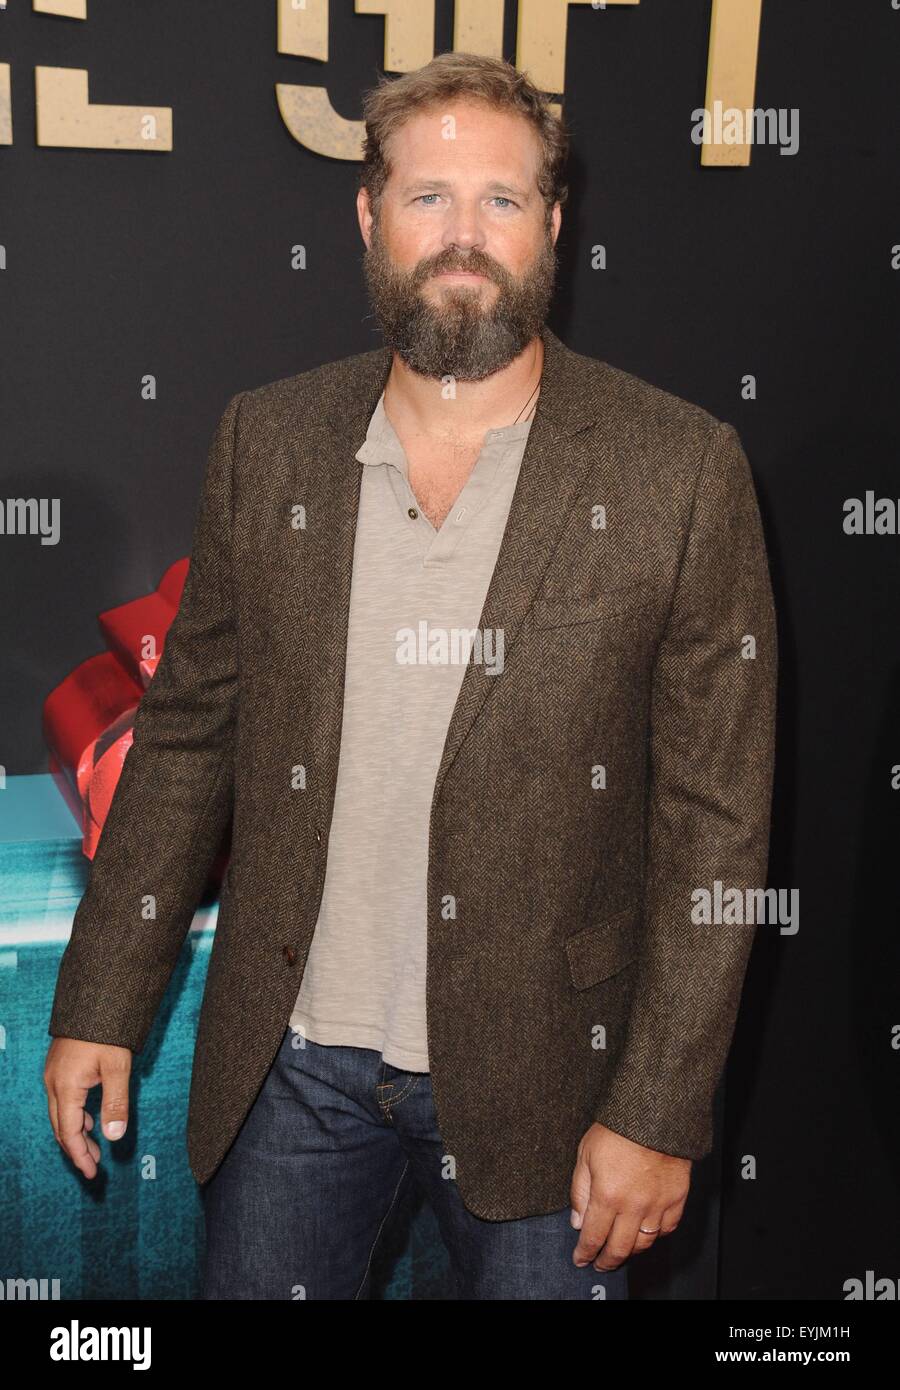 Los Angeles, CA, USA. 30th July, 2015. David Denman at arrivals for THE GIFT Premiere, Regal Cinemas L.A. LIVE Stadium 14, Los Angeles, CA July 30, 2015. Credit:  Dee Cercone/Everett Collection/Alamy Live News Stock Photo